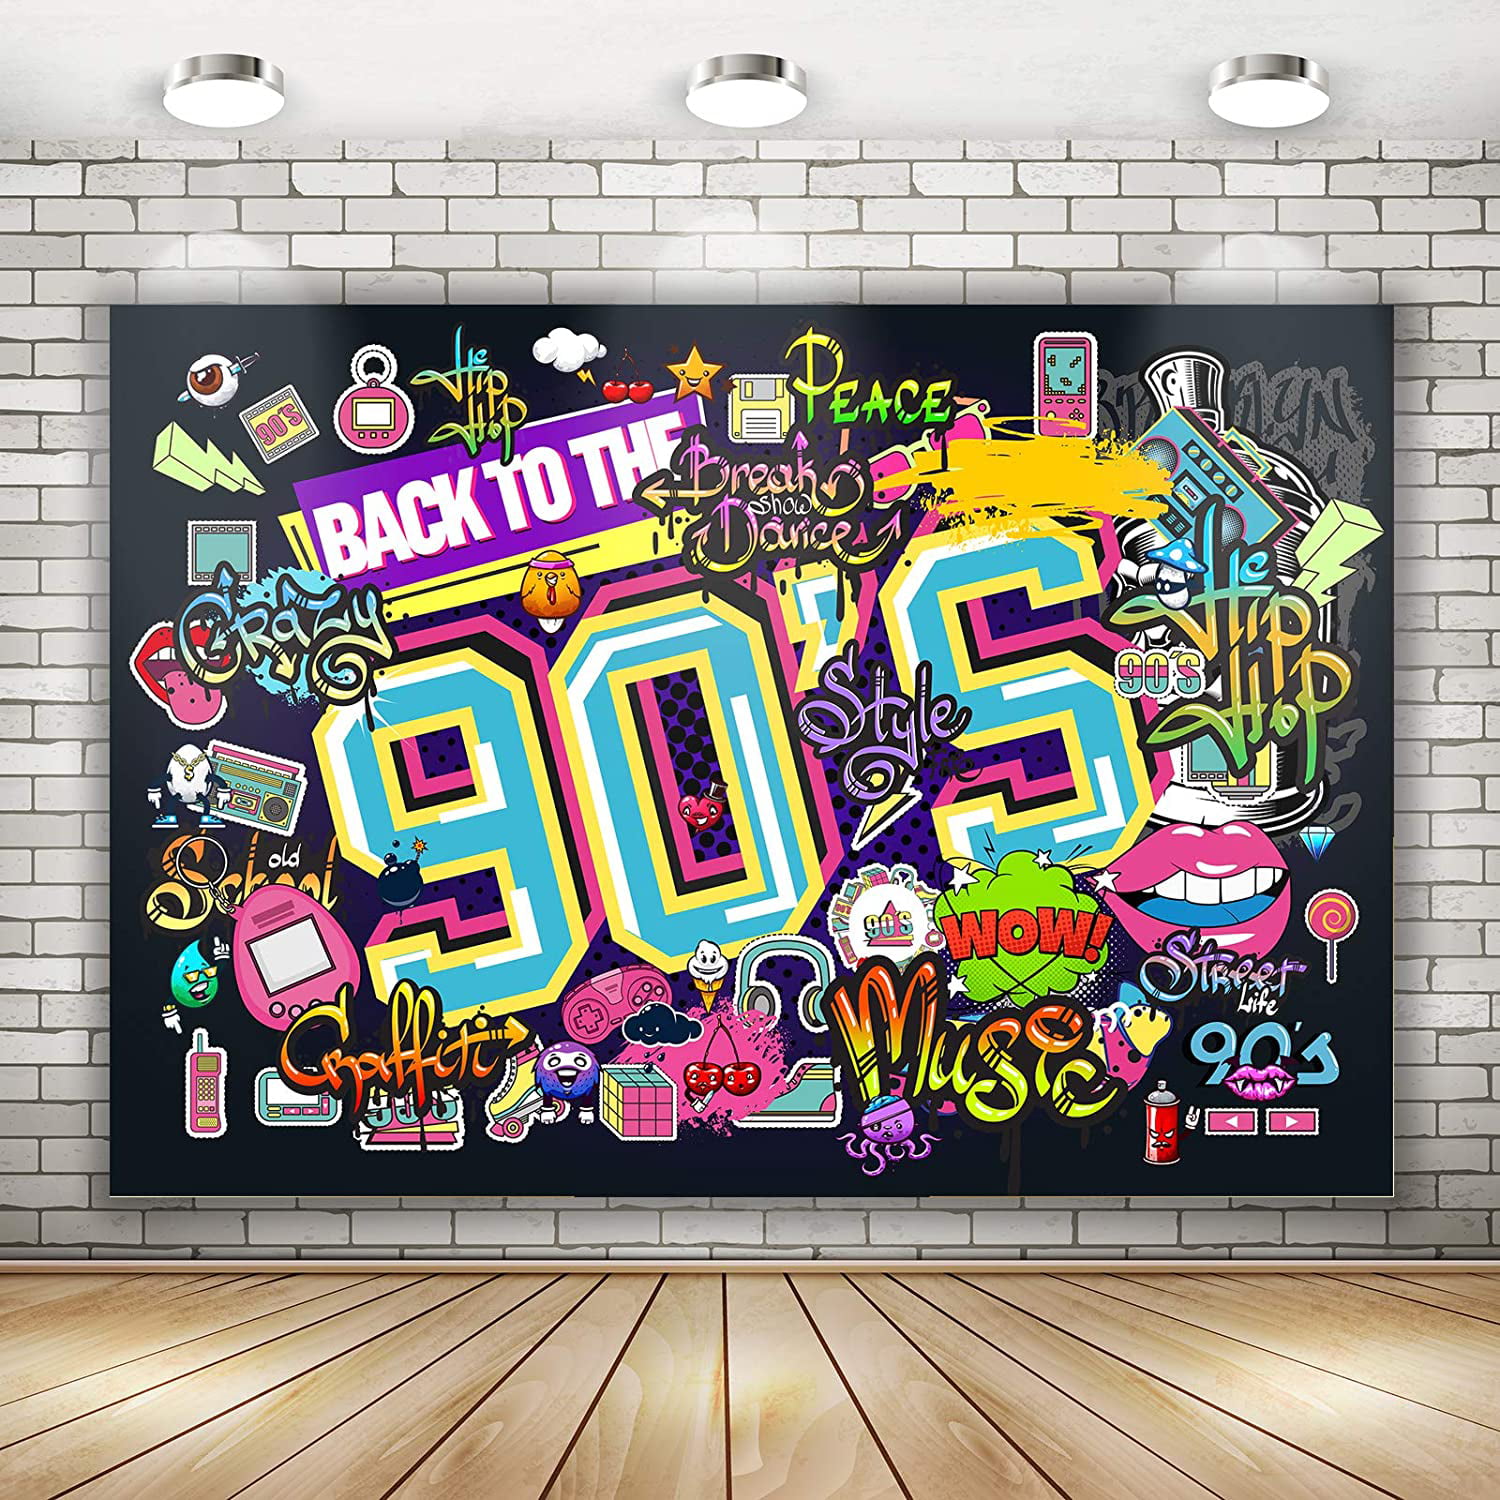 I LOVE THE 90/'S CUTOUT WALL LARGE PARTY DECORATION 2 PACK